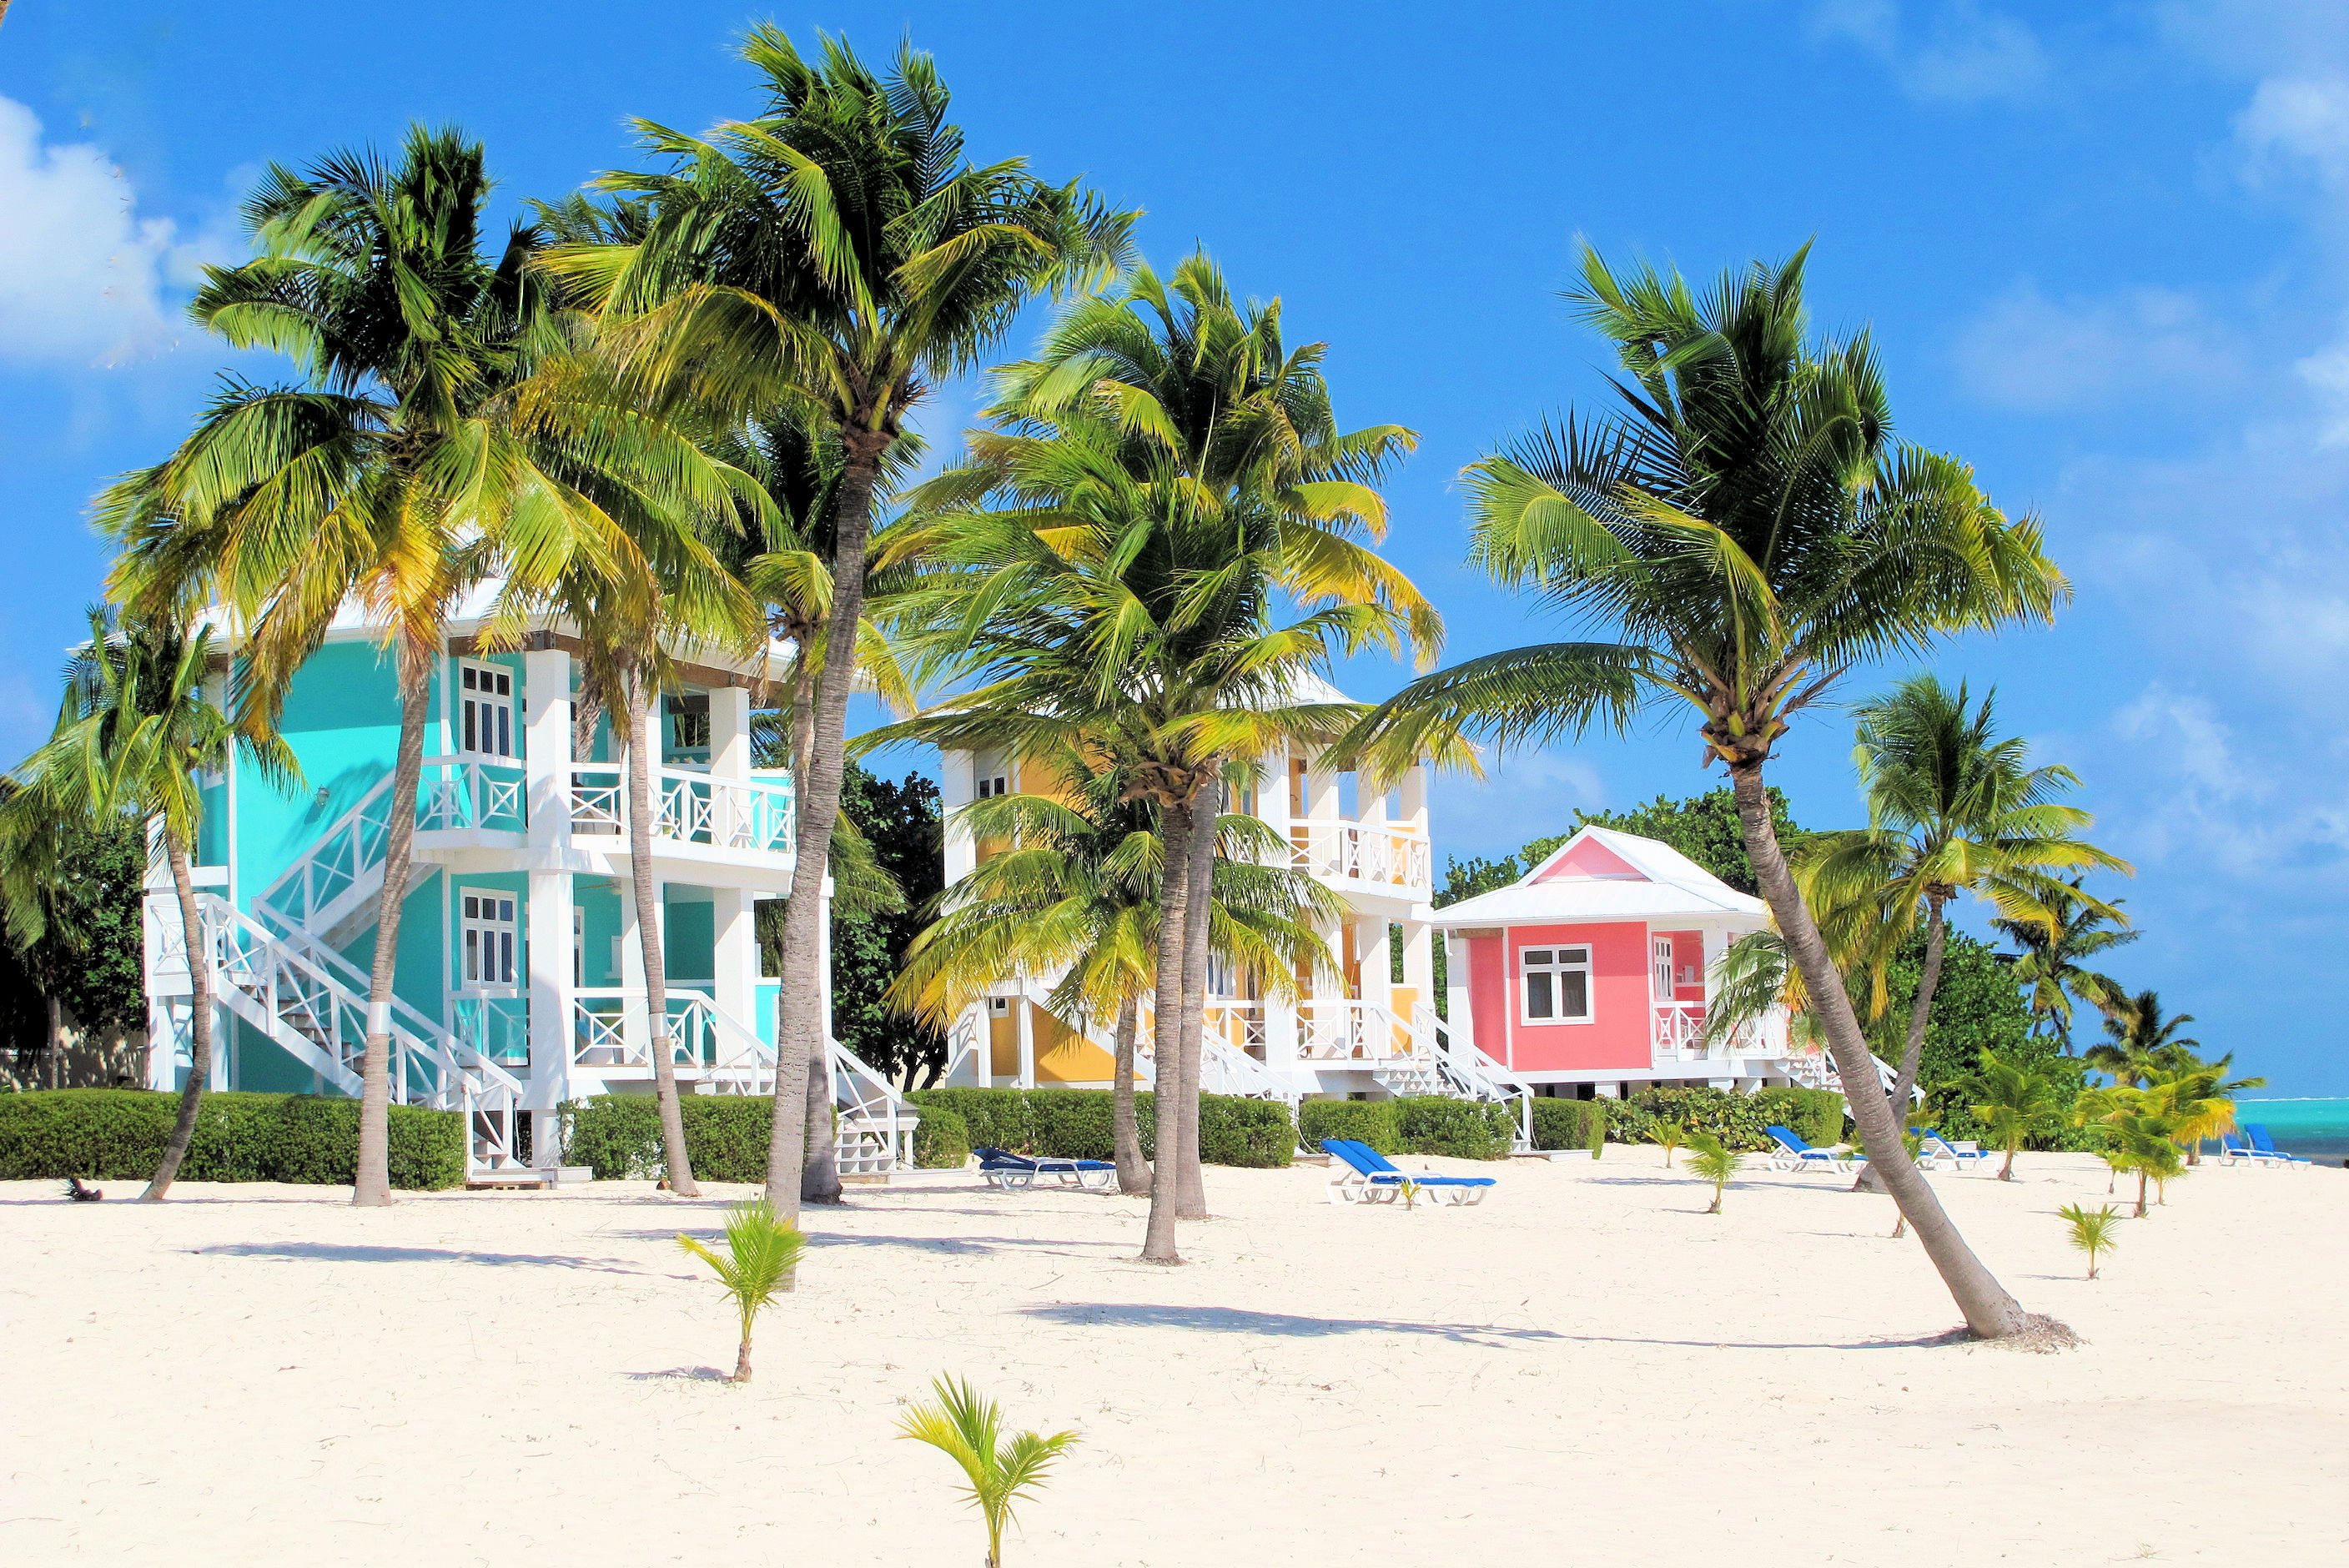 homes on the beach with palm trees and sand all around